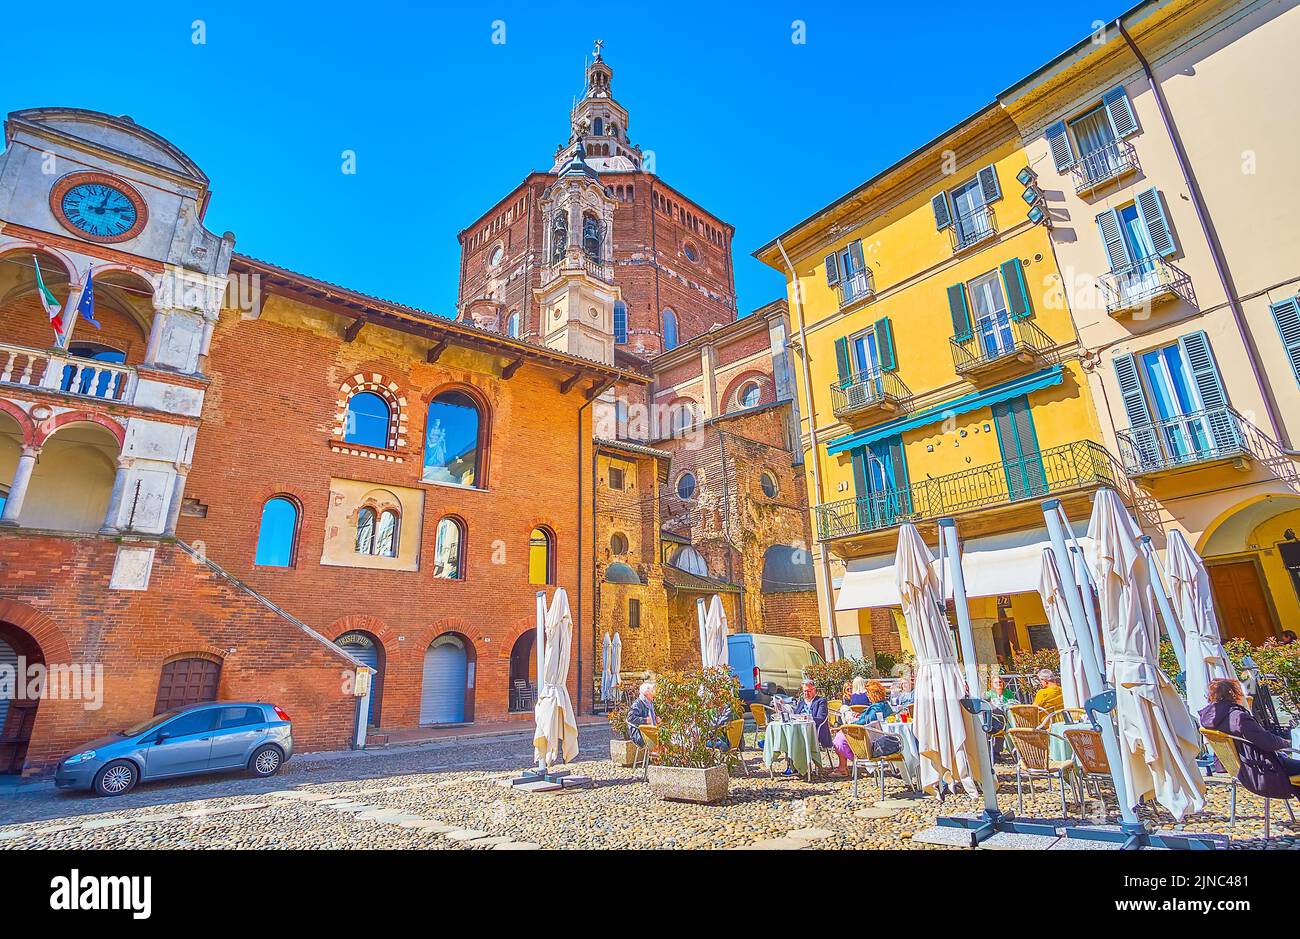 PAVIA, ITALY - APRIL 9, 2022: The view on medieval brick Palazzo Broletto and high dome of Cathedral on background, on April 9 in Pavia, Italy Stock Photo